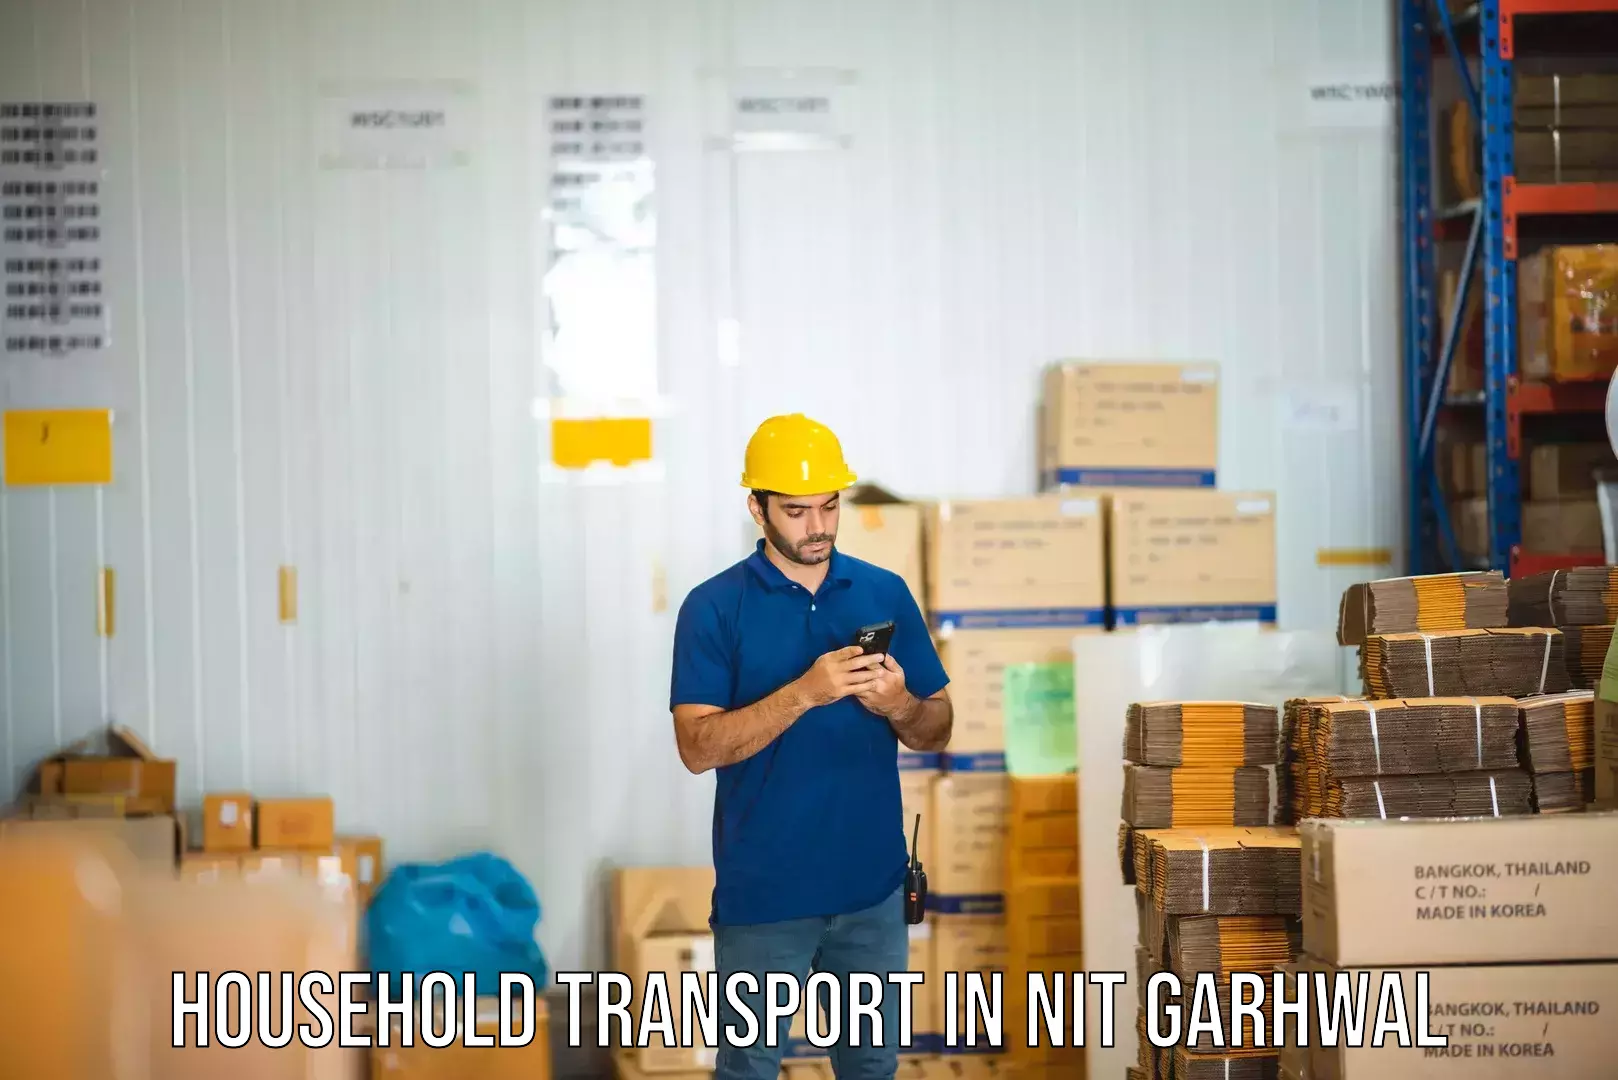 Professional goods transport in NIT Garhwal